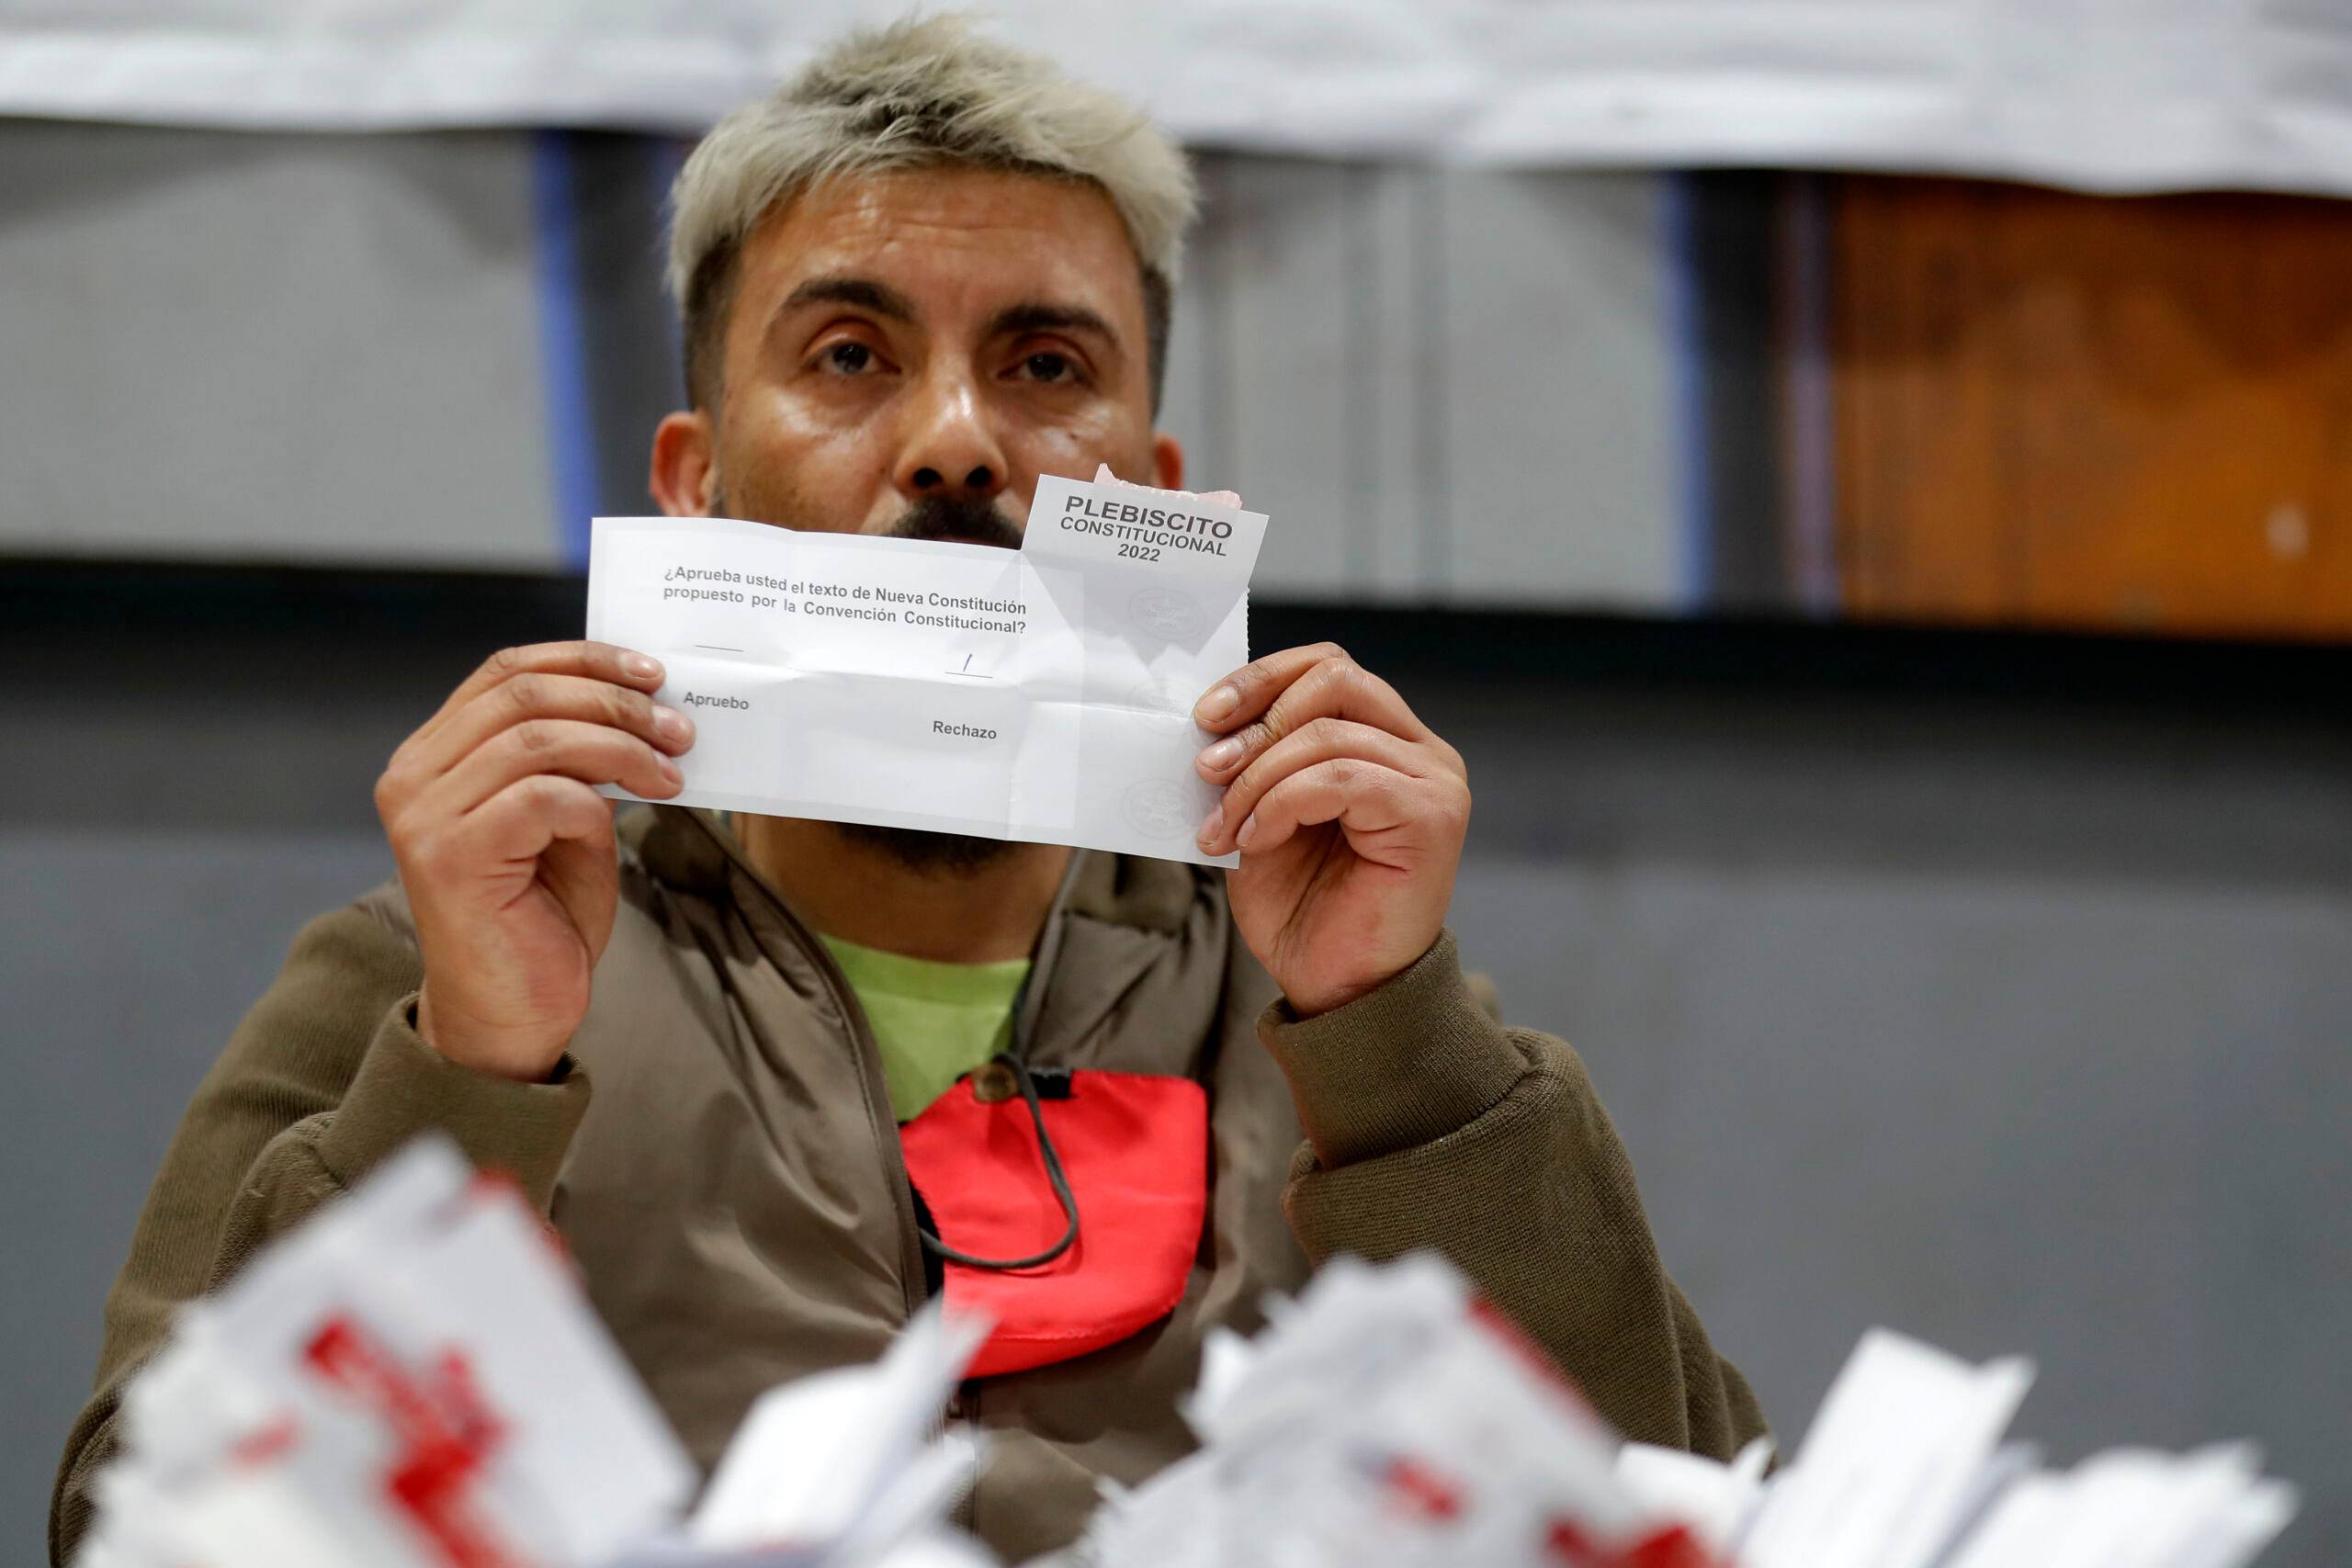 An election official counts ballots after polls closed during the referendum to approve or reject a new Constitution, in Santiago, on September 4, 2022. - Chileans voted Sunday on whether to adopt a new constitution that would break from the era of Augusto Pinochet's dictatorship, foster a more welfare-based society and boost Indigenous rights. Social upheaval that began in 2019 provided the impulse to overhaul the constitution, but the 388-article draft -- including proposals to legalize abortion -- has proved controversial. (Photo by JAVIER TORRES / AFP)